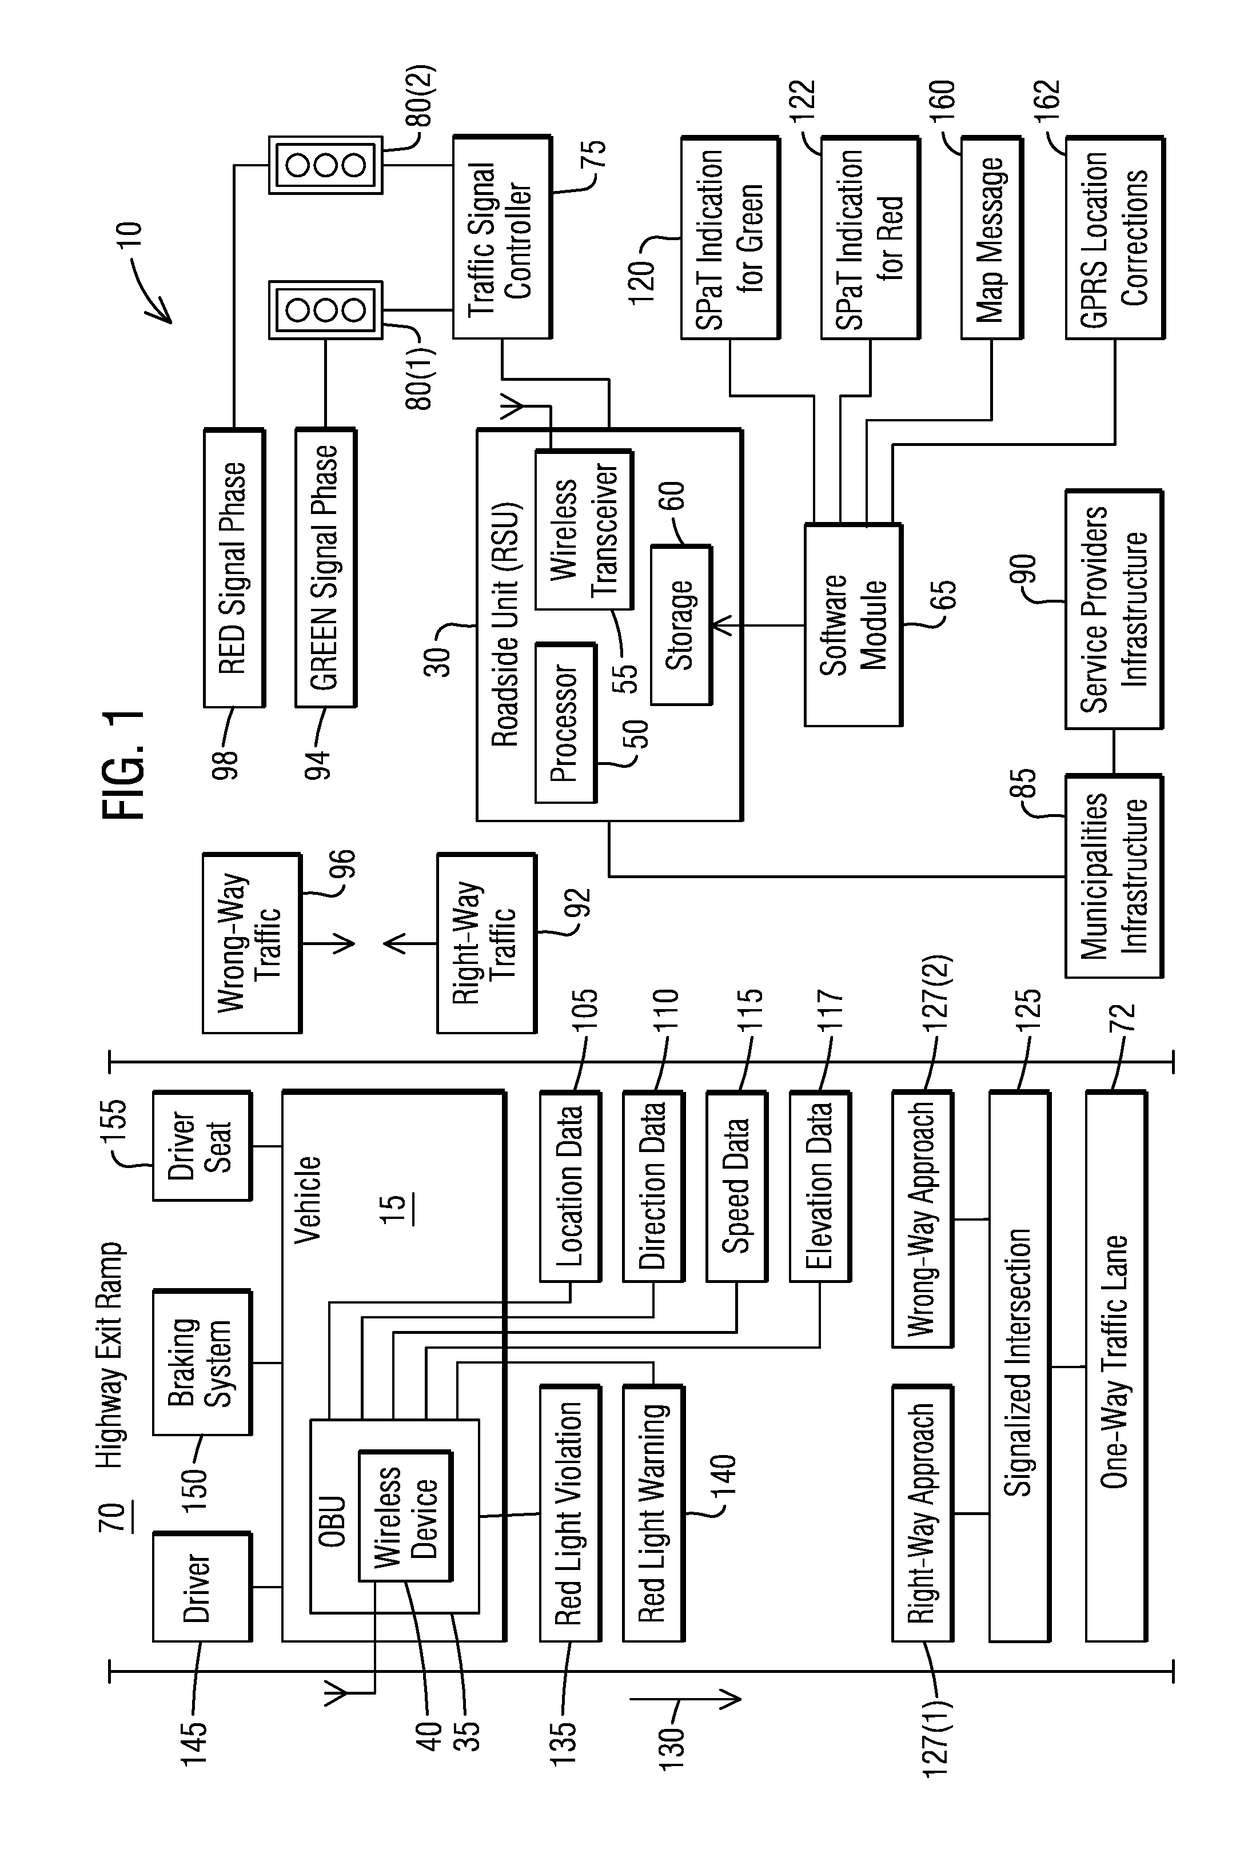 Connected vehicle traffic safety system and a method of warning drivers of a wrong-way travel